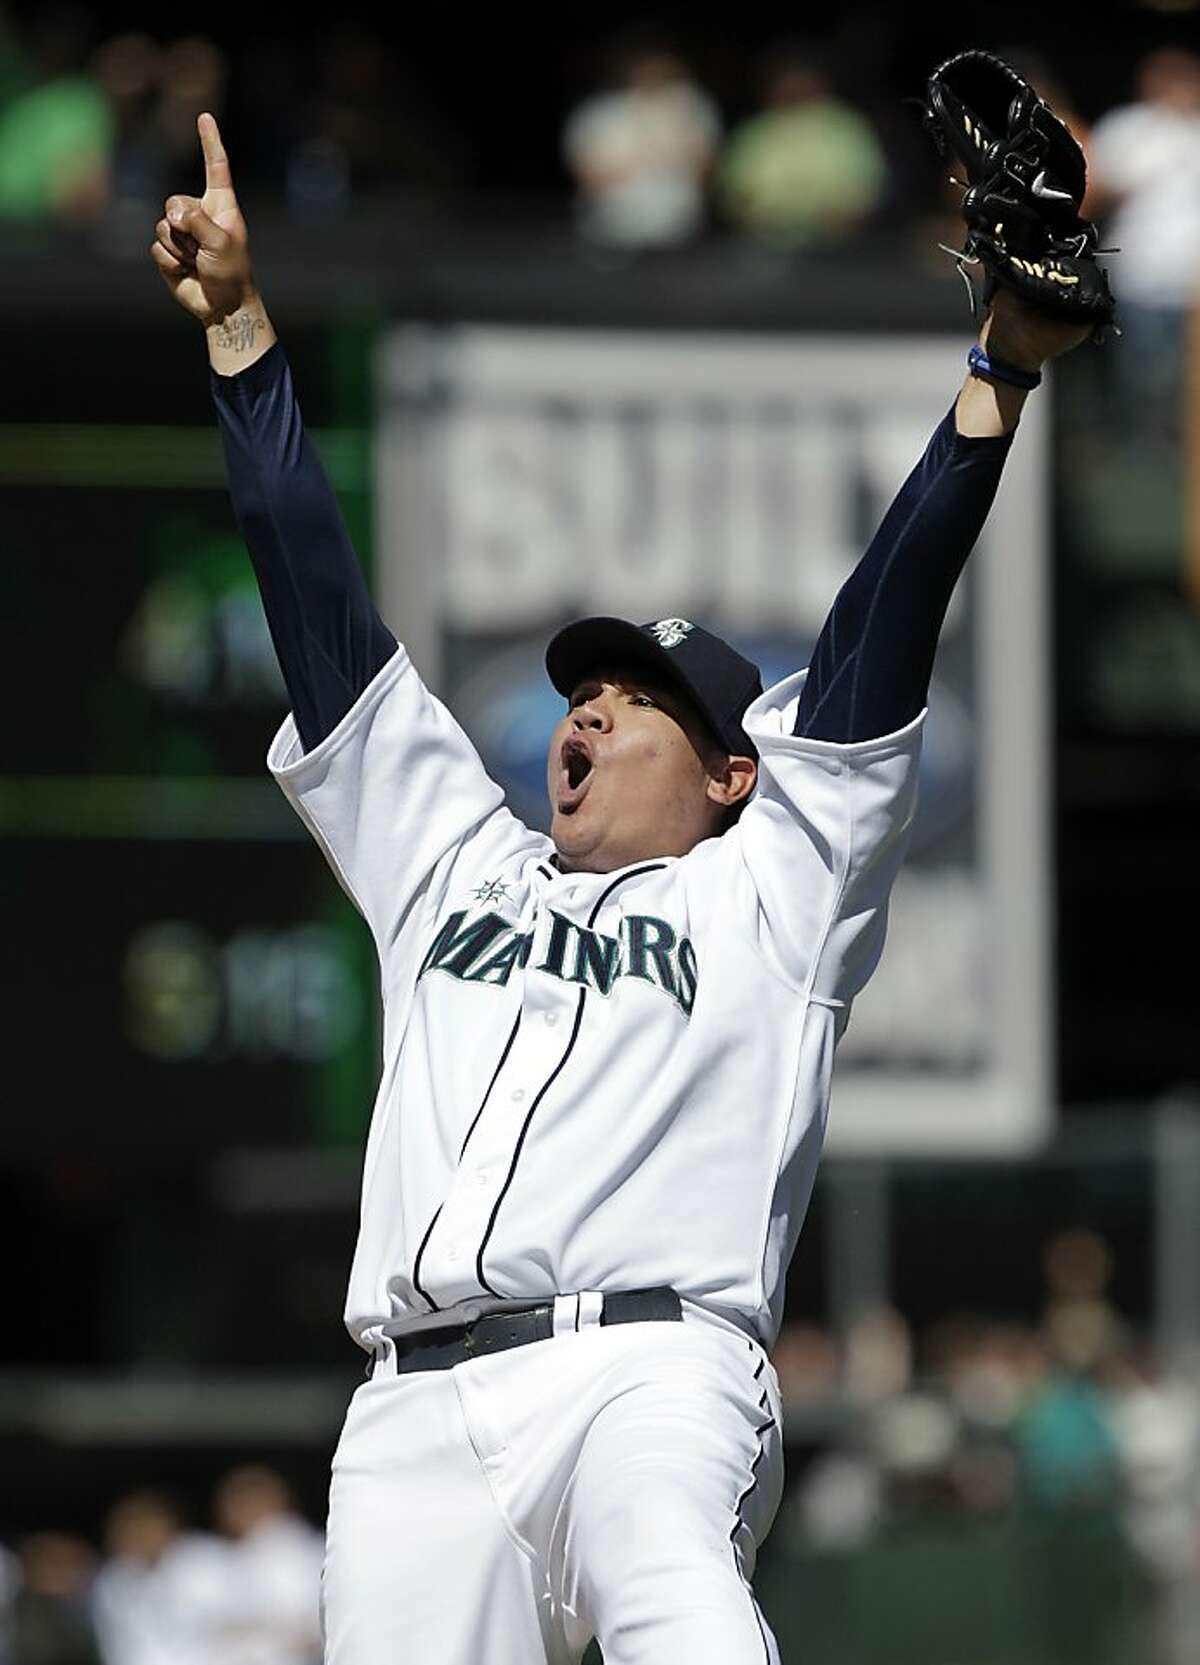 Seattle Mariners pitcher Felix Hernandez reacts after throwing a perfect game to end the ninth inning of baseball game against the Tampa Bay Rays, Wednesday, Aug. 15, 2012, in Seattle. The Mariners won 1-0. (AP Photo/Ted S. Warren)